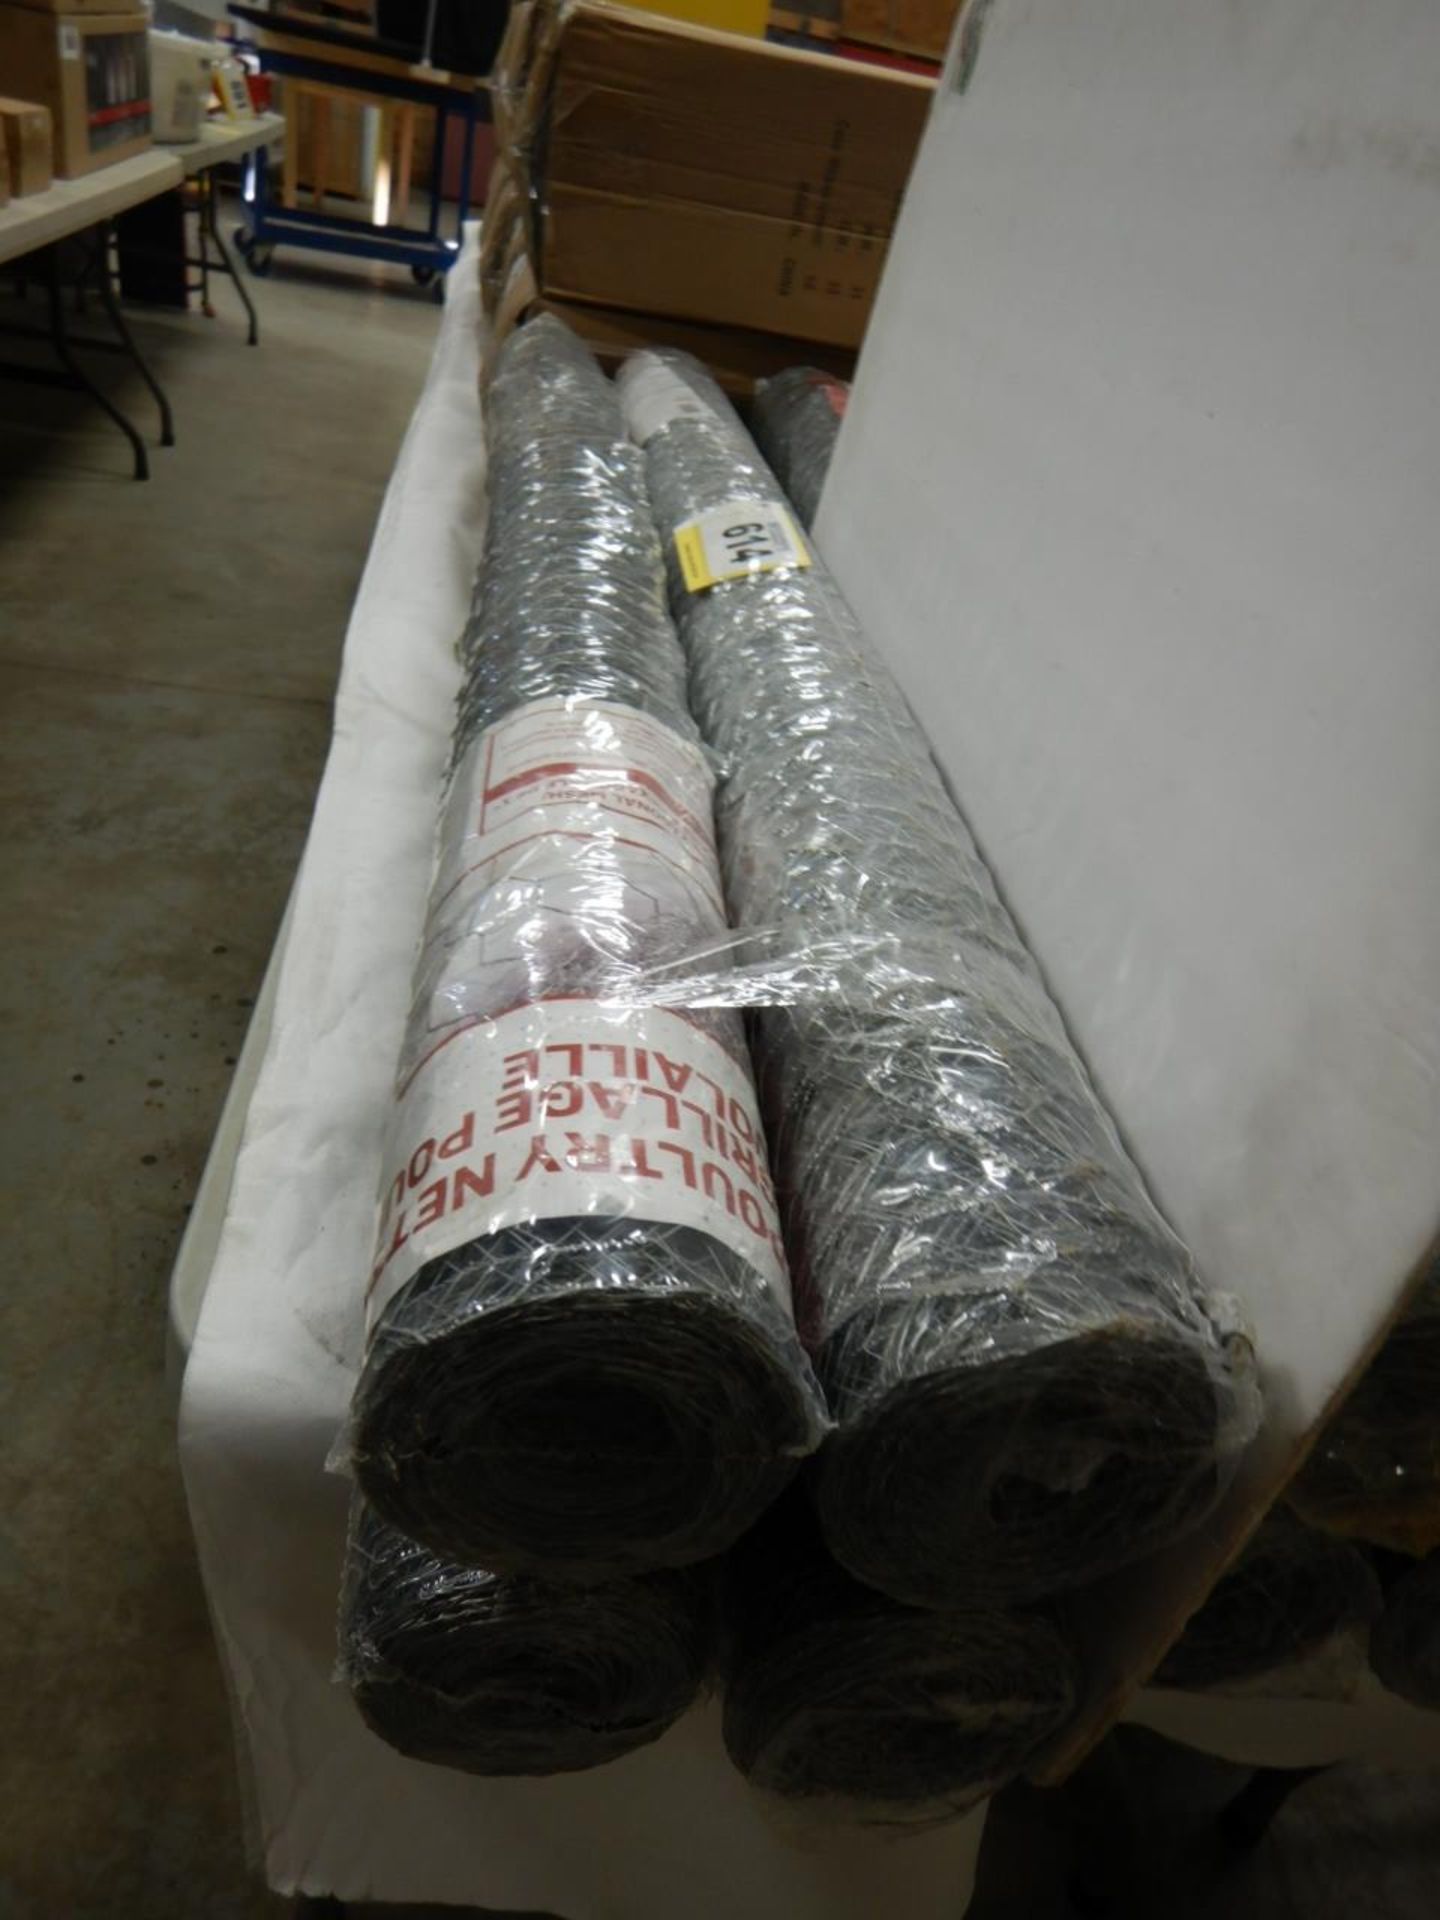 4-ROLLS OF FCL 24" METAL POULTRY NETTING 1"X22GA.X48"X50FT (SOME ROLLS HAVE WATER DAMAGE)